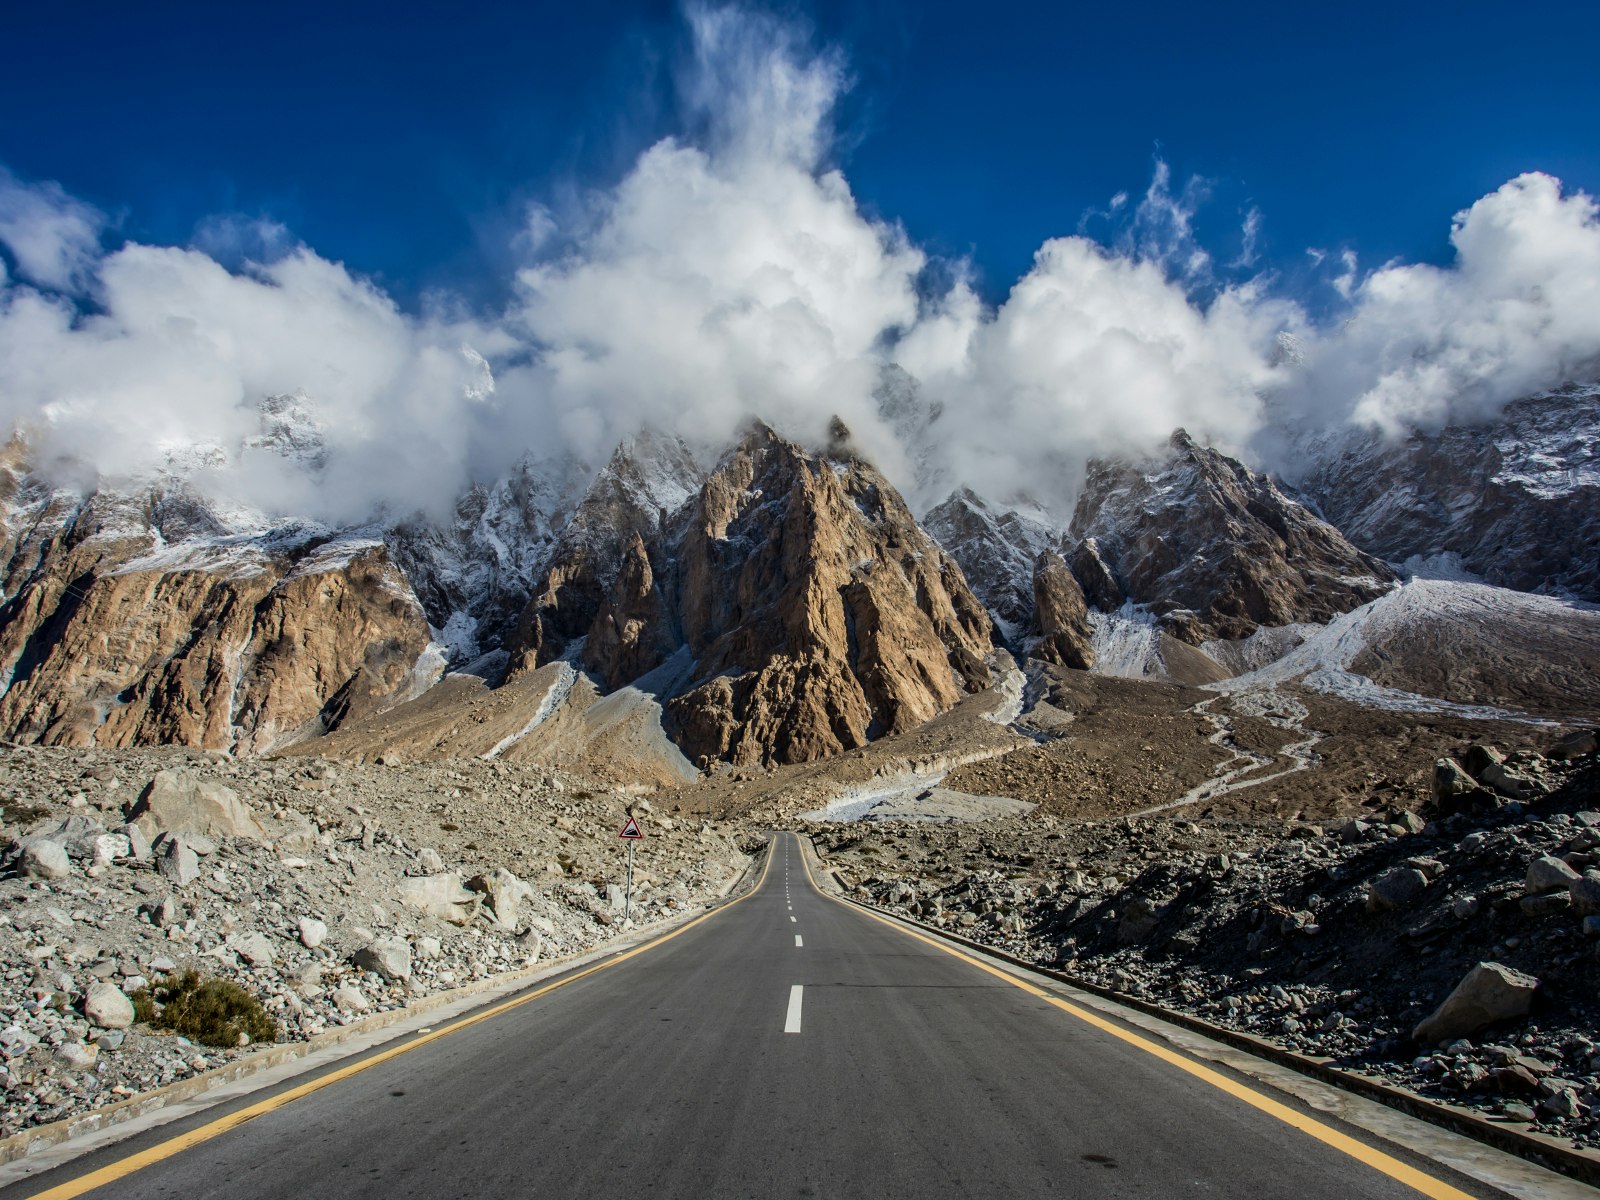 A section of the Karakoram Highway looking towards some rugged peaks © Pawika Tongtavee / Shutterstock